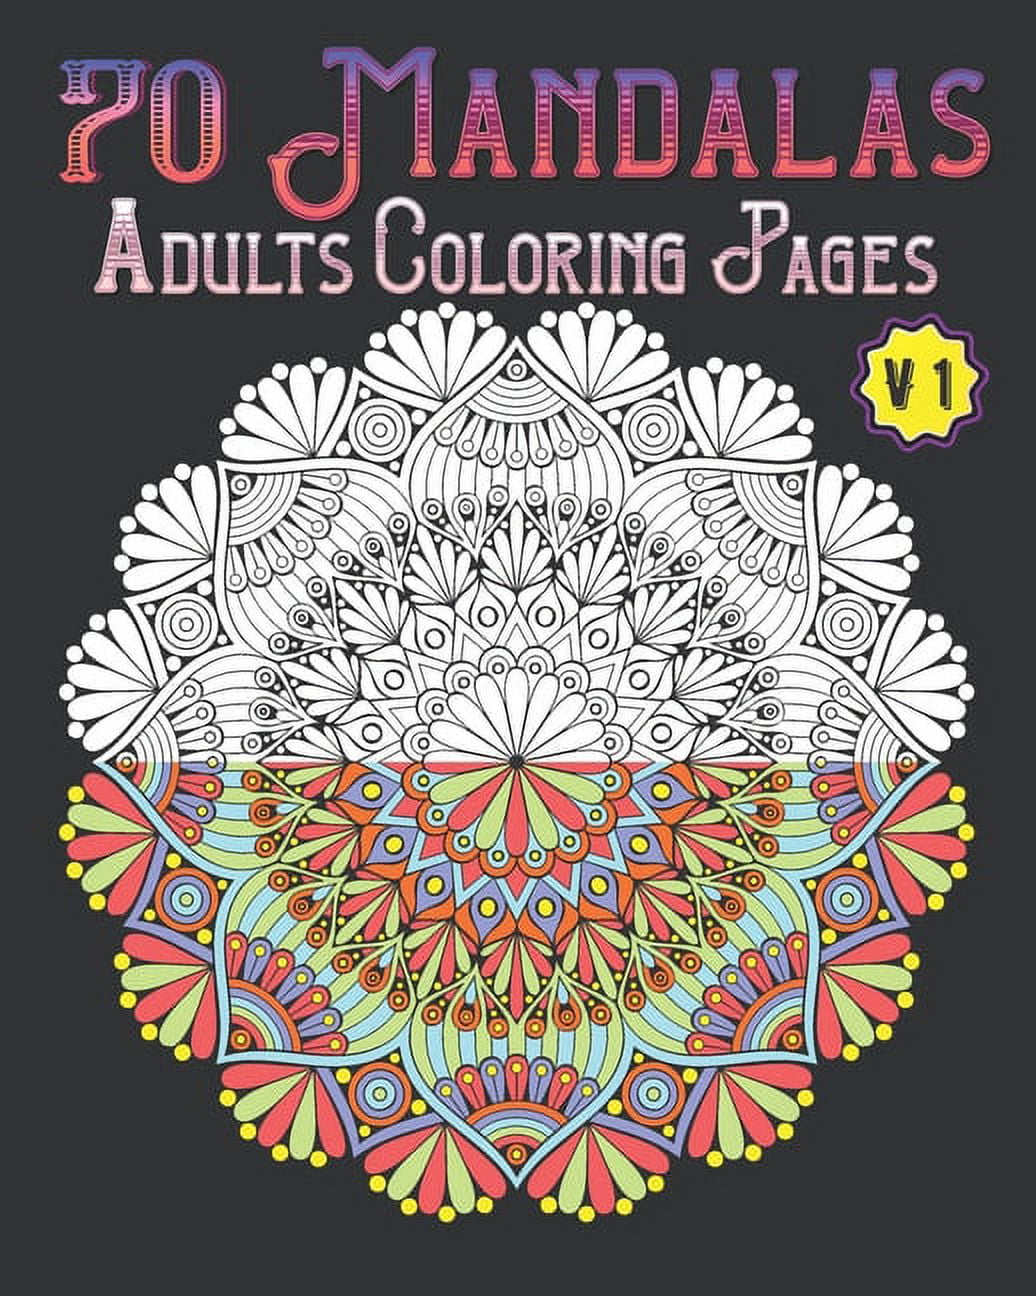 101 Patterns Coloring Book Vol.1: Mindfulness & Relaxing Adult Mandala  Pattern Coloring Book for Women, Kids, and Seniors. Stress & Anxiety Relief